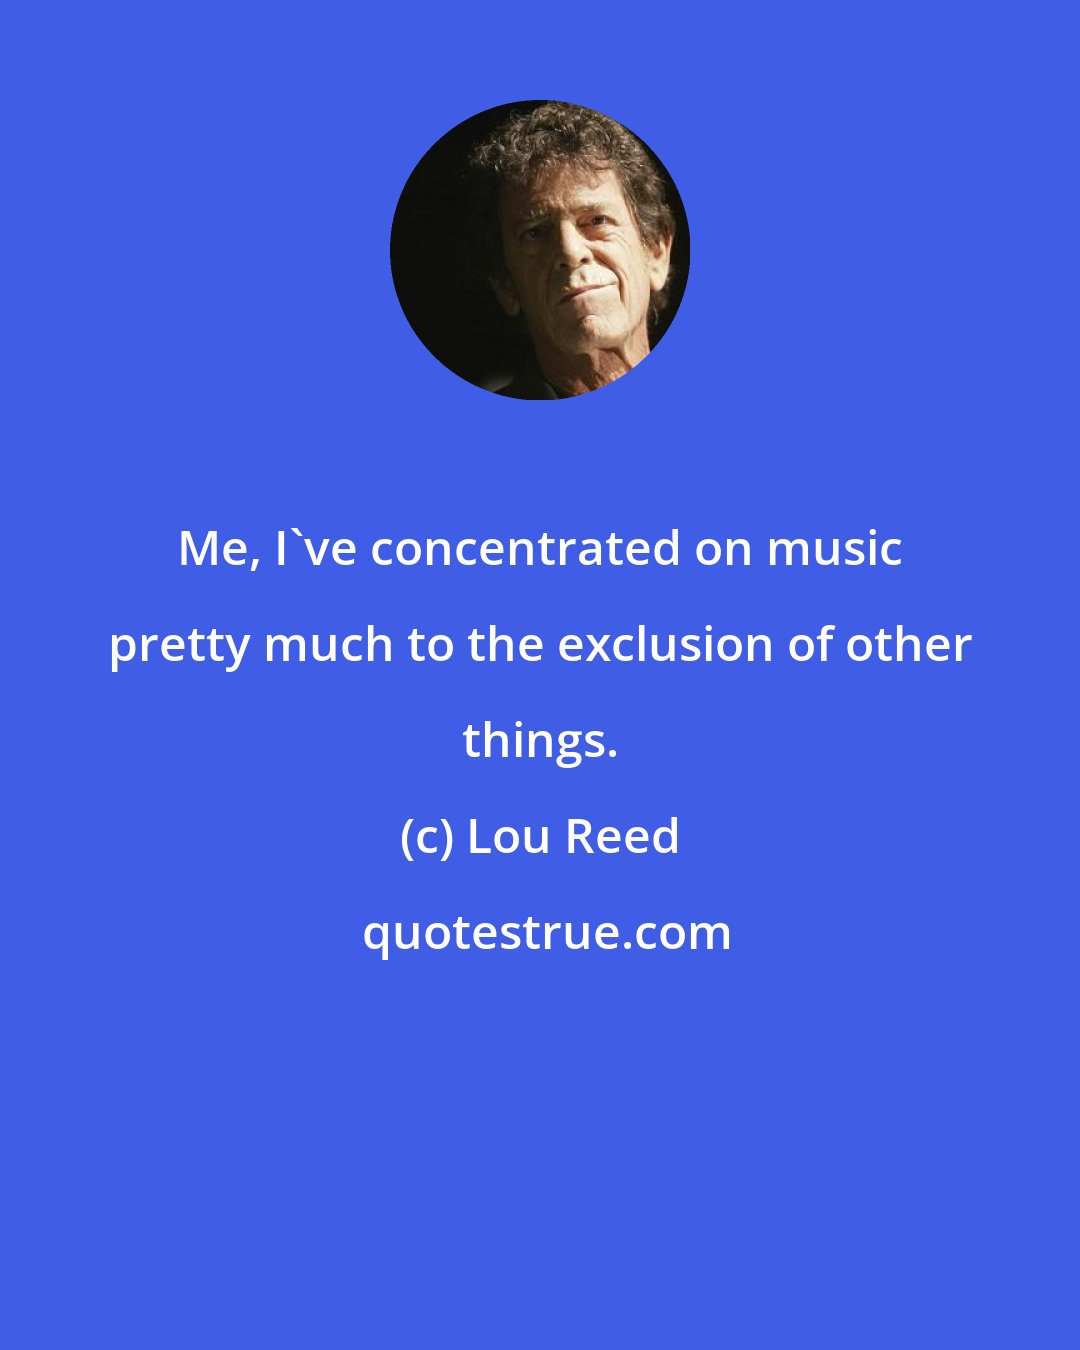 Lou Reed: Me, I've concentrated on music pretty much to the exclusion of other things.